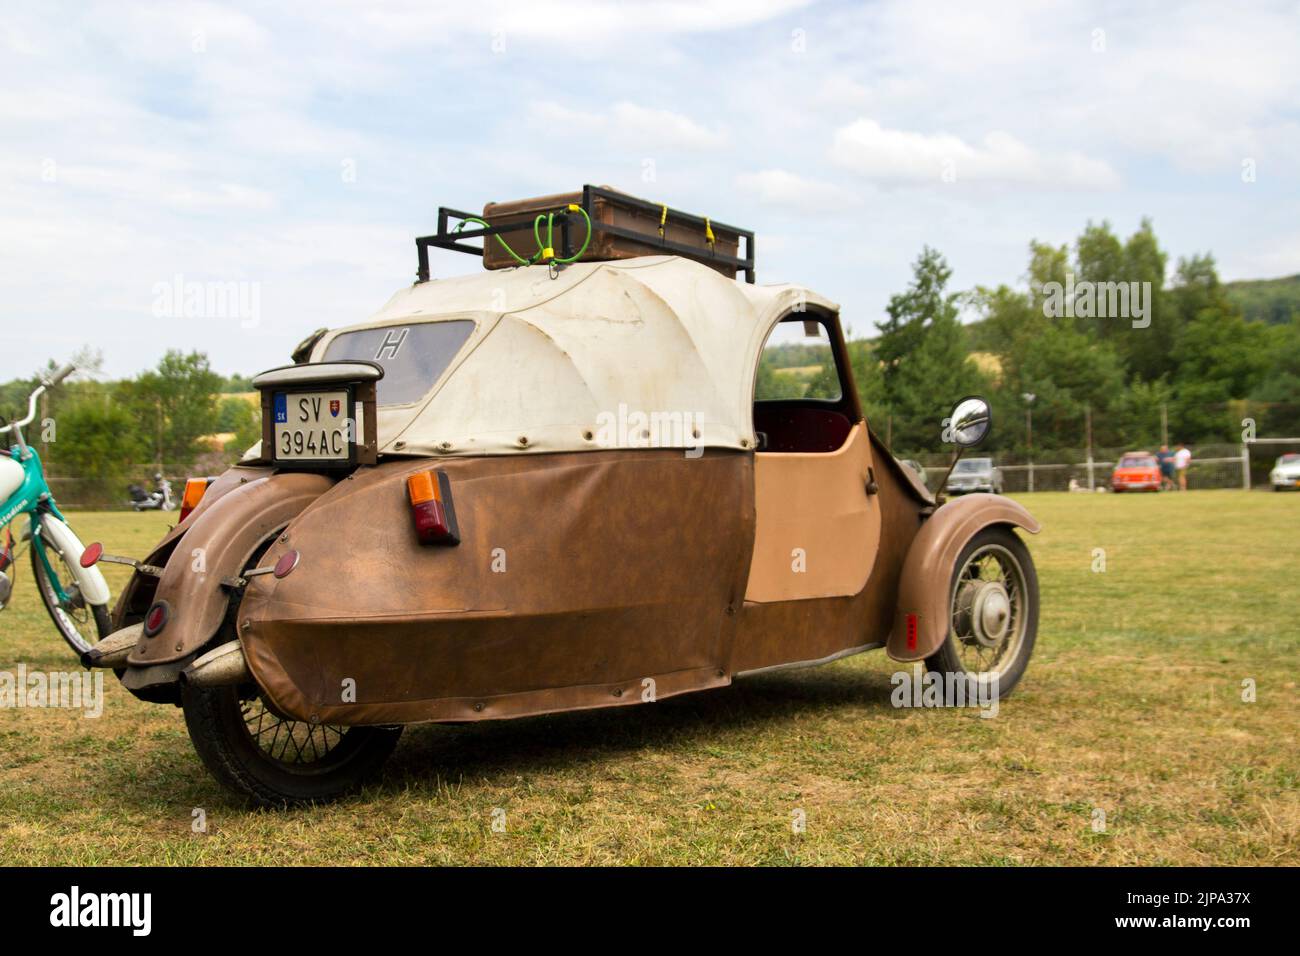 Rear Side View of Original Classic Brown Three Wheeled Leather Cloth Velorex Car with a Roof Rack at Oldtimer Classic Car Meeting Stock Photo